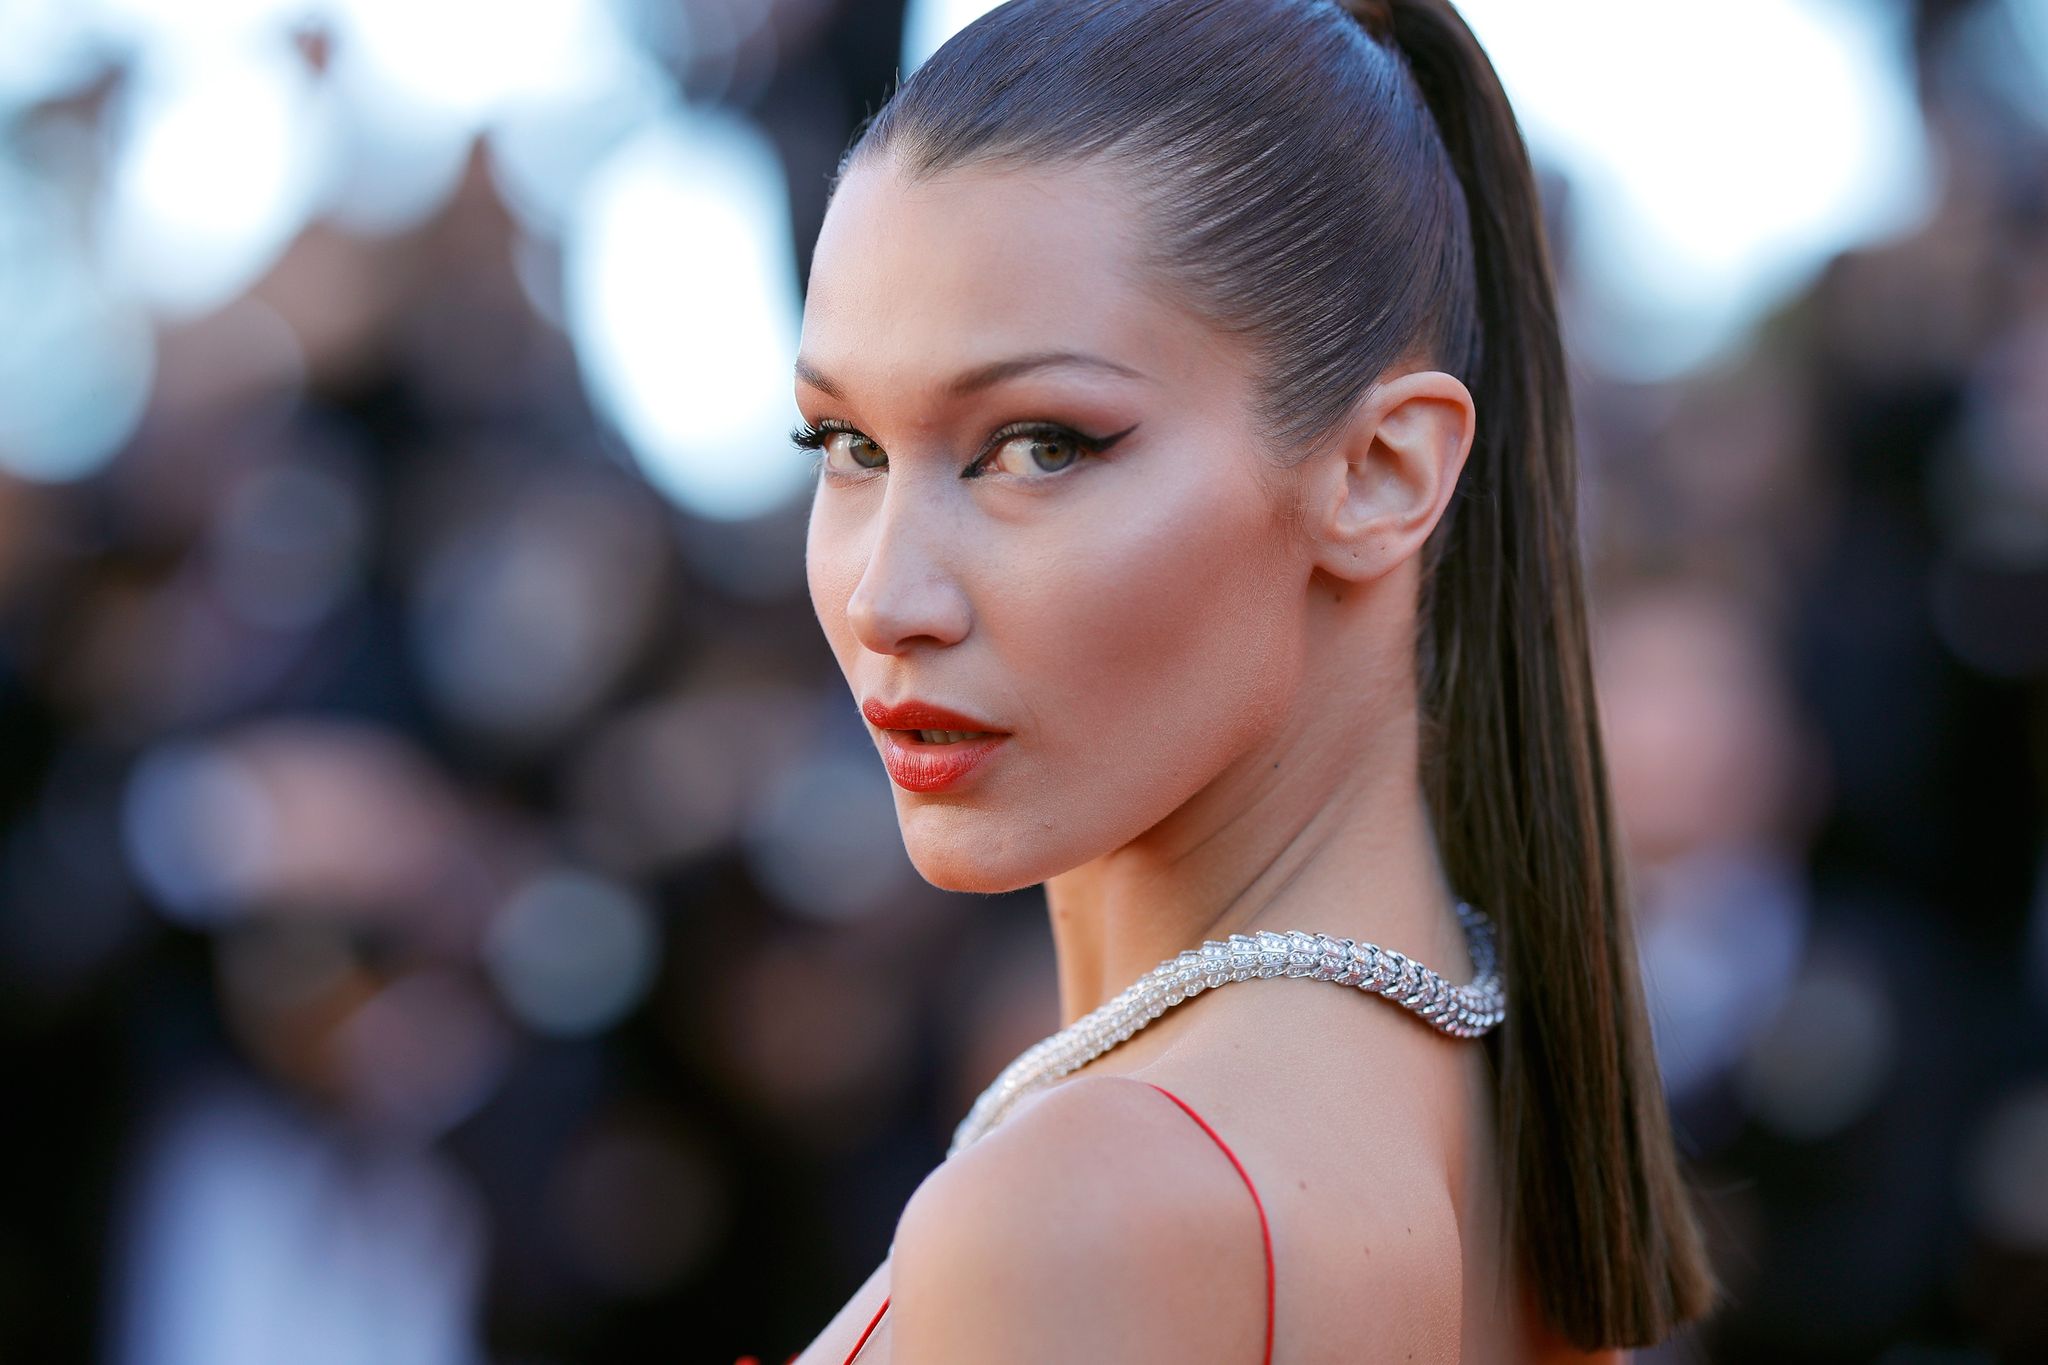 cannes, france   may 19  bella hadid attends the okja screening during the 70th annual cannes film festival at palais des festivals on may 19, 2017 in cannes, france  photo by andreas rentzgetty images